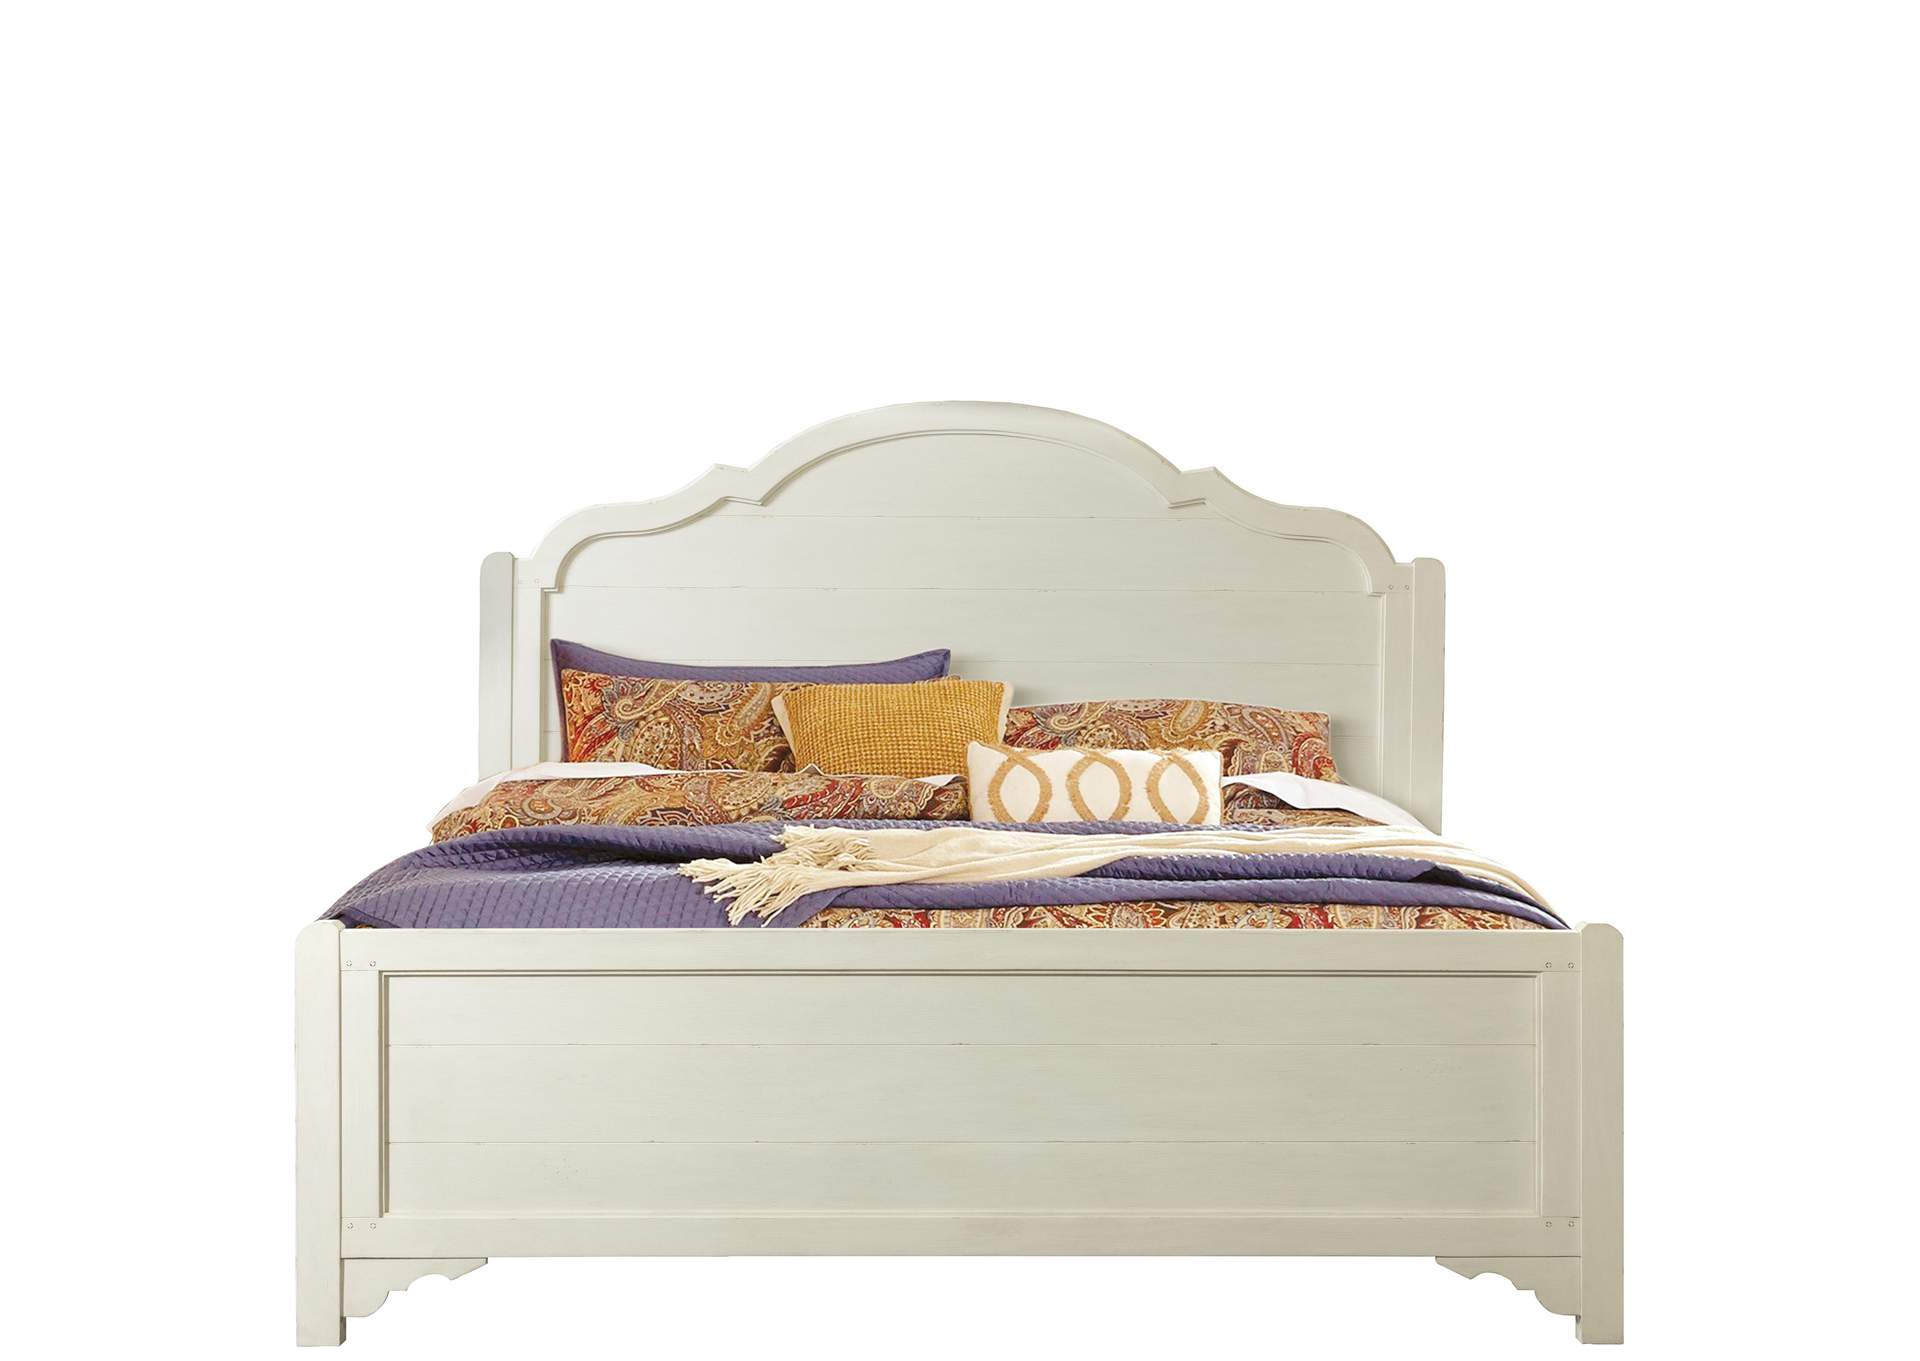 Grand Haven Feathered White Panel Queen Bed,Riverside